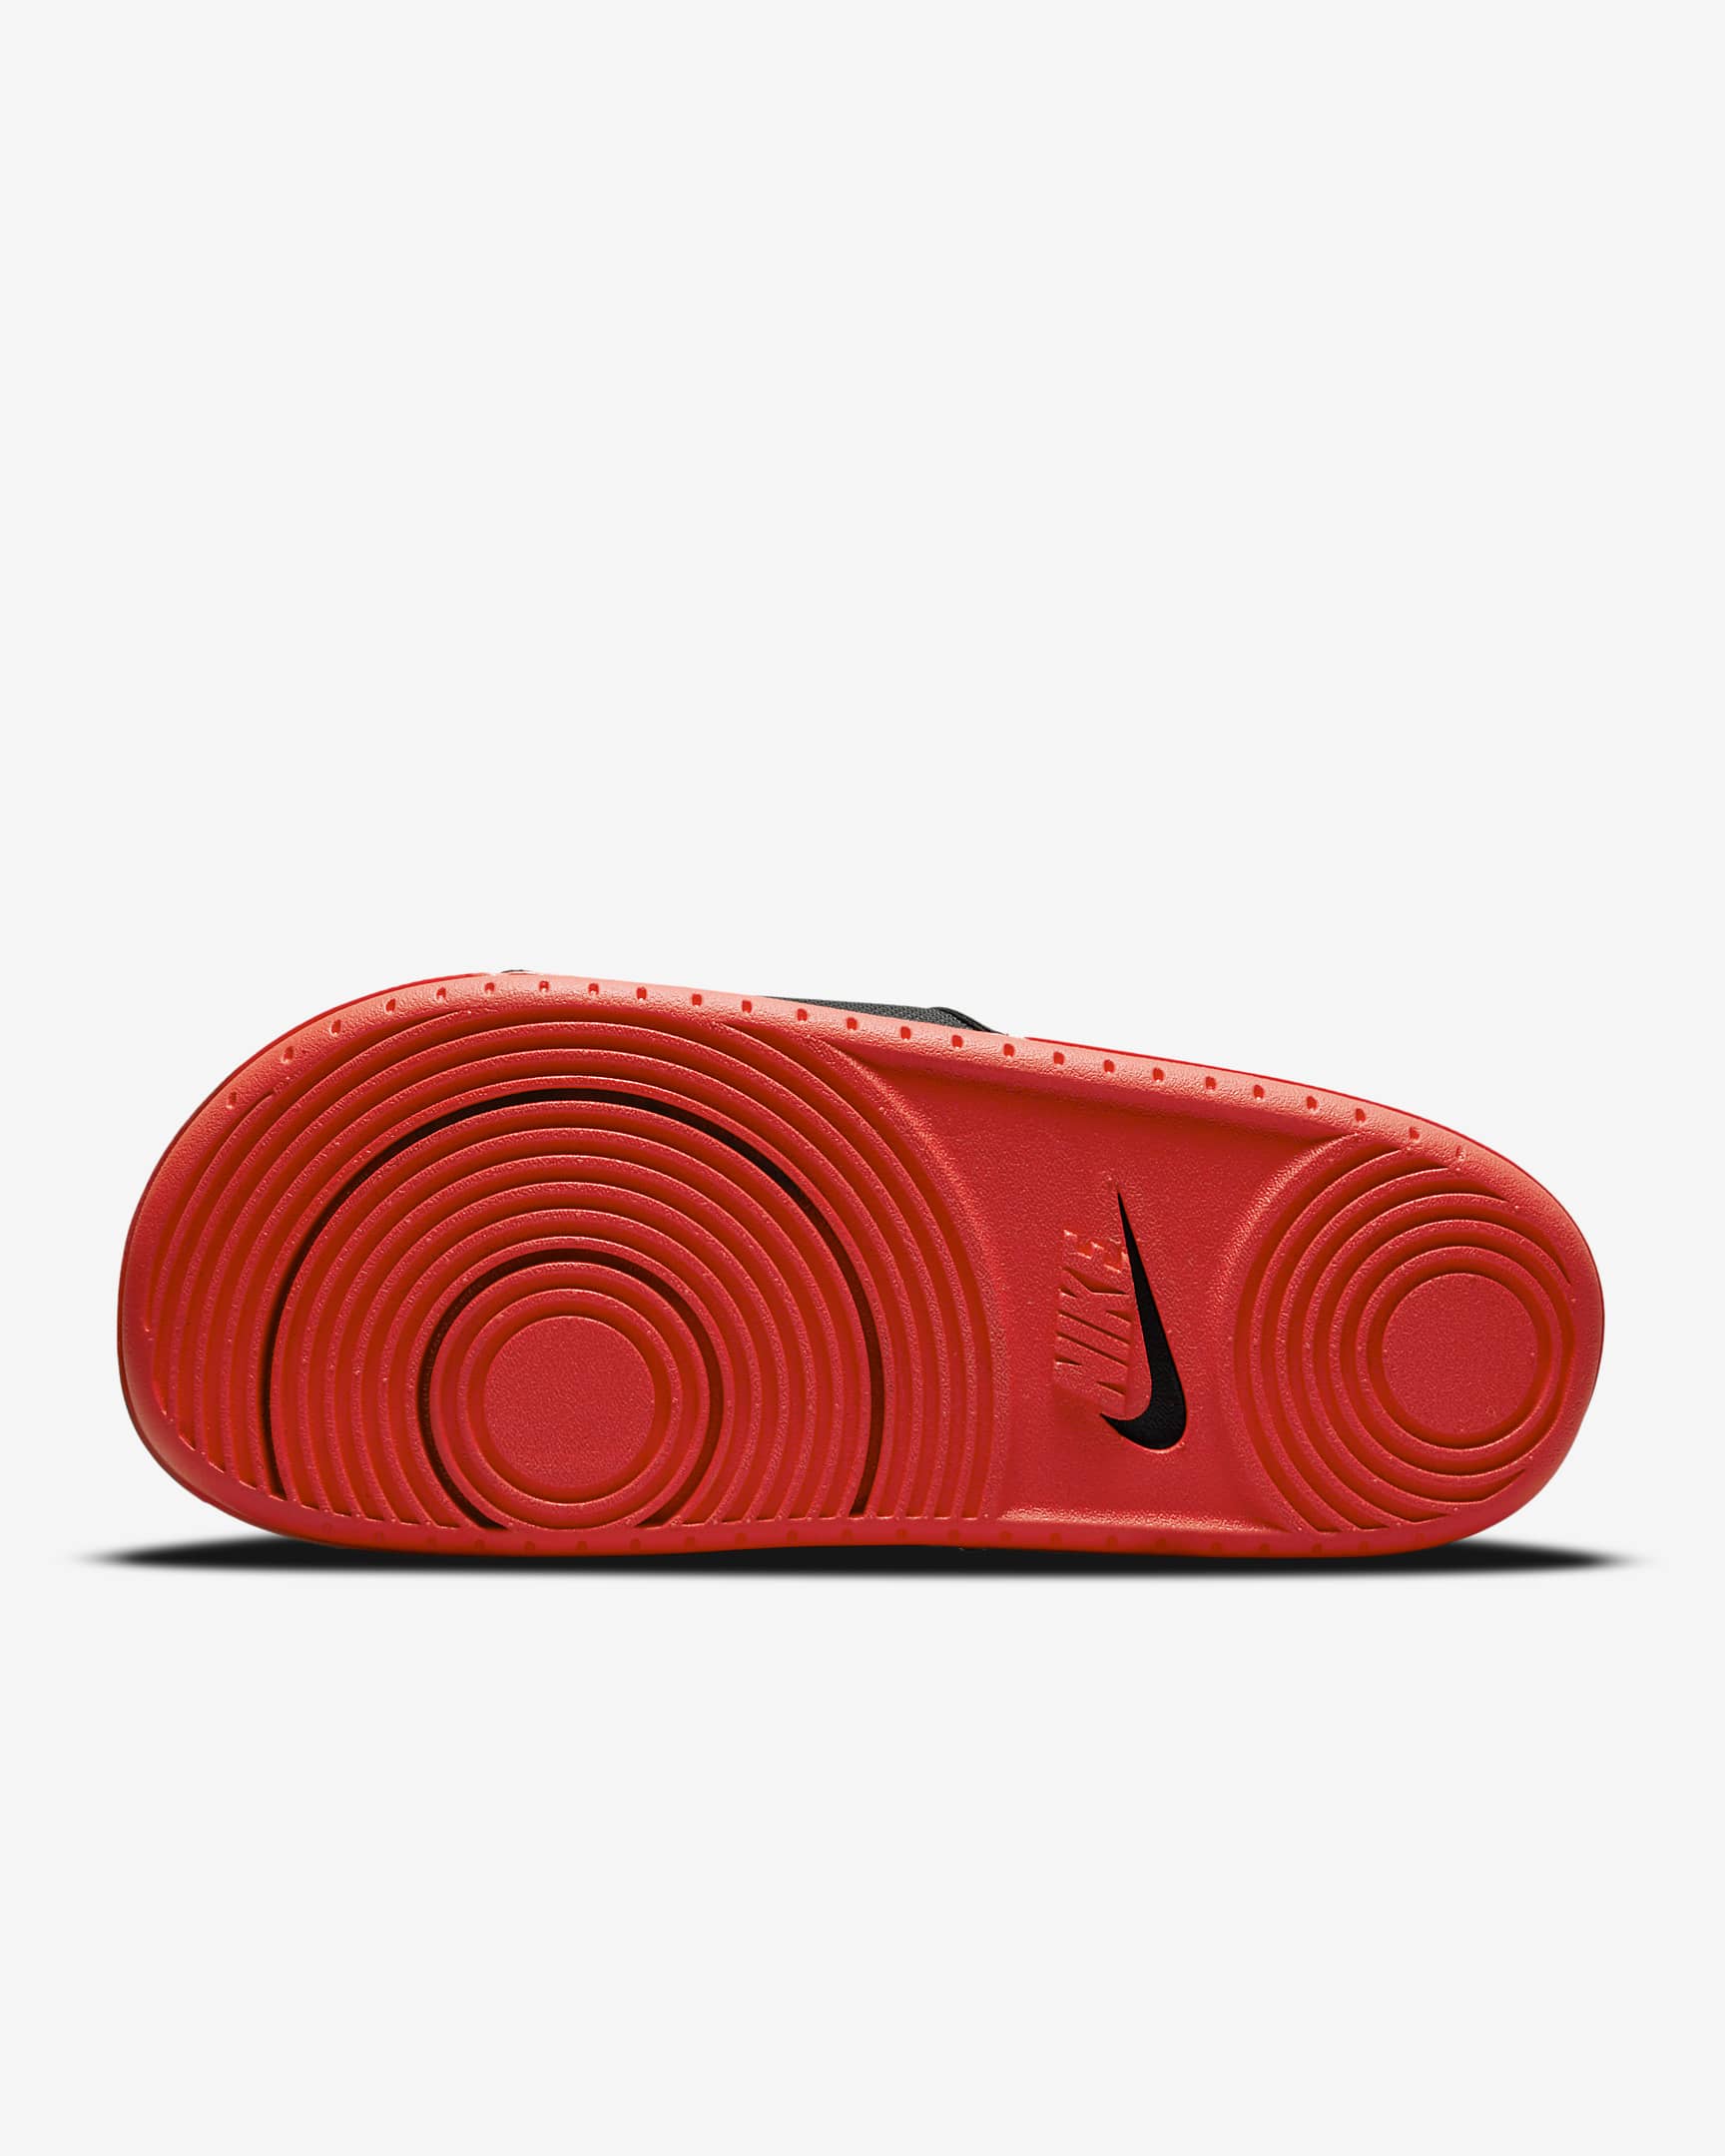 Offcourt Slide product image